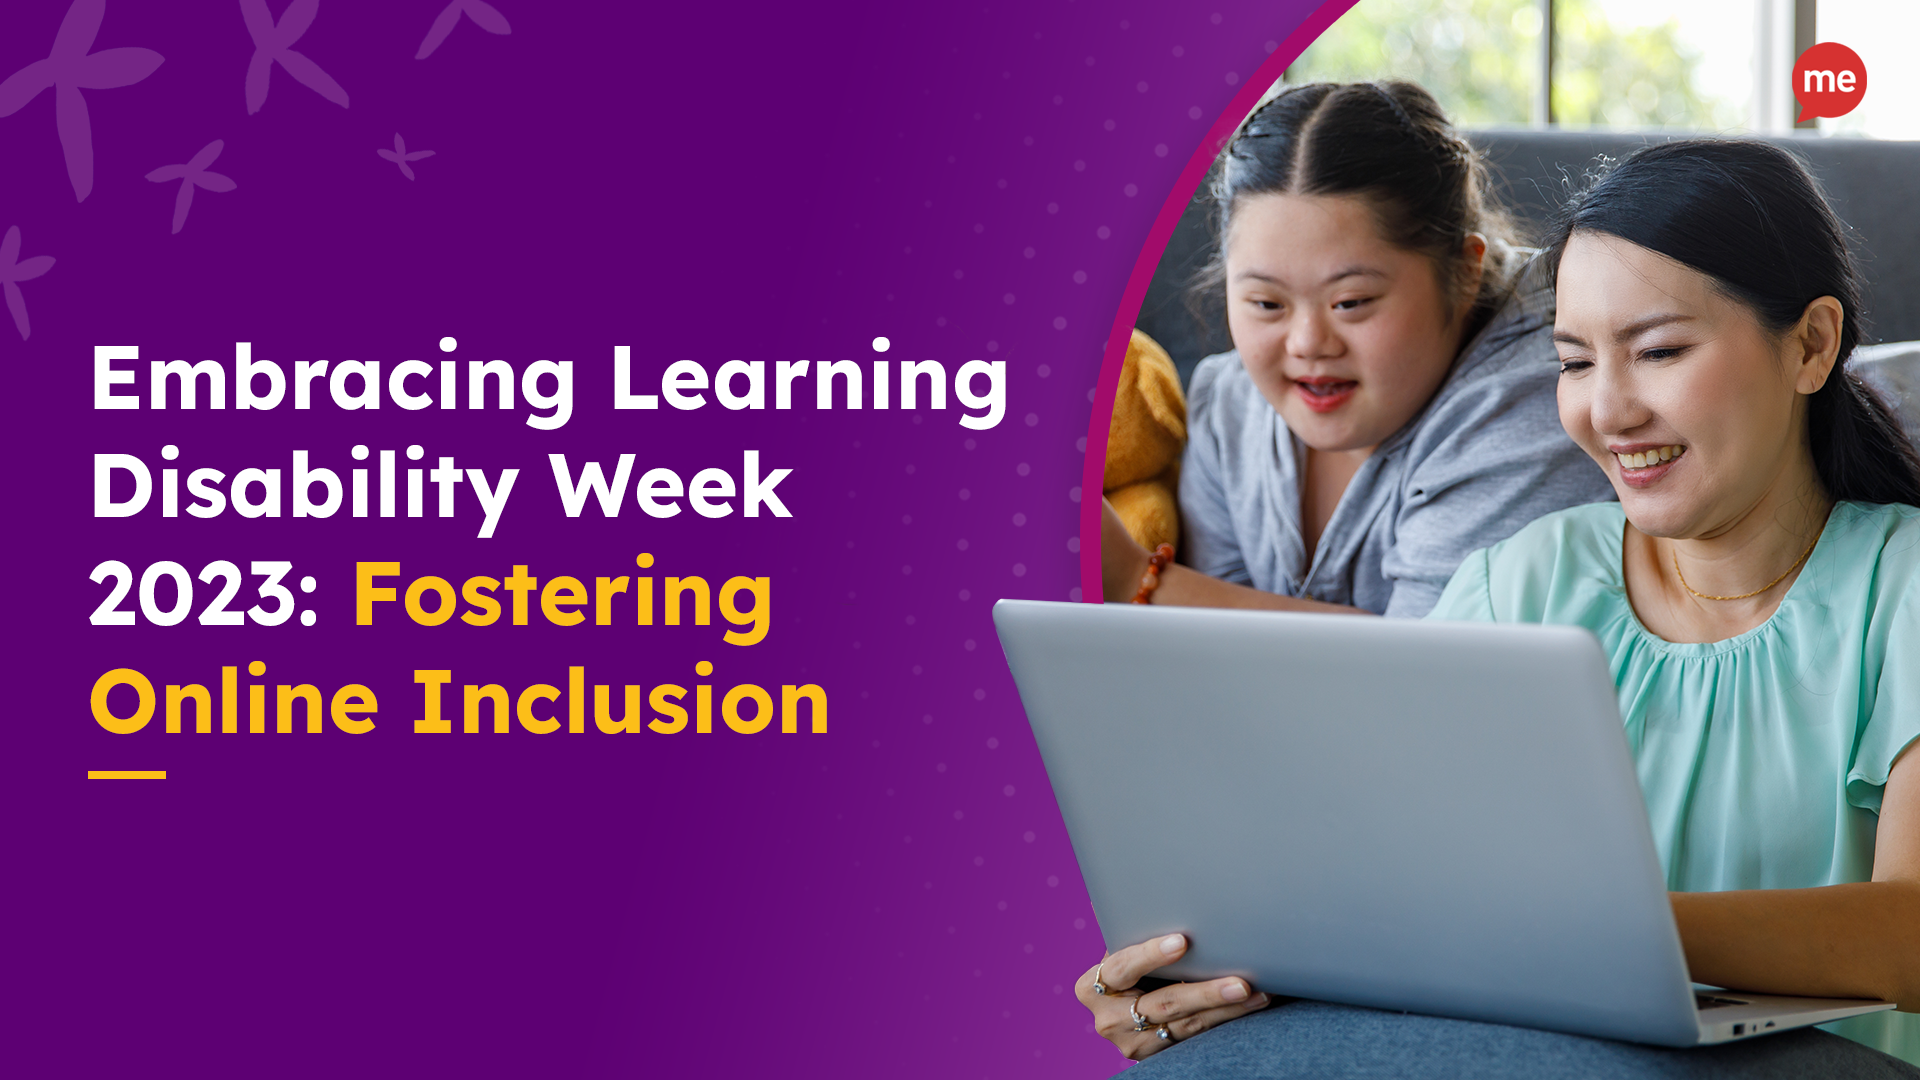 Embracing Learning Disability Week 2023: Fostering Online Inclusion